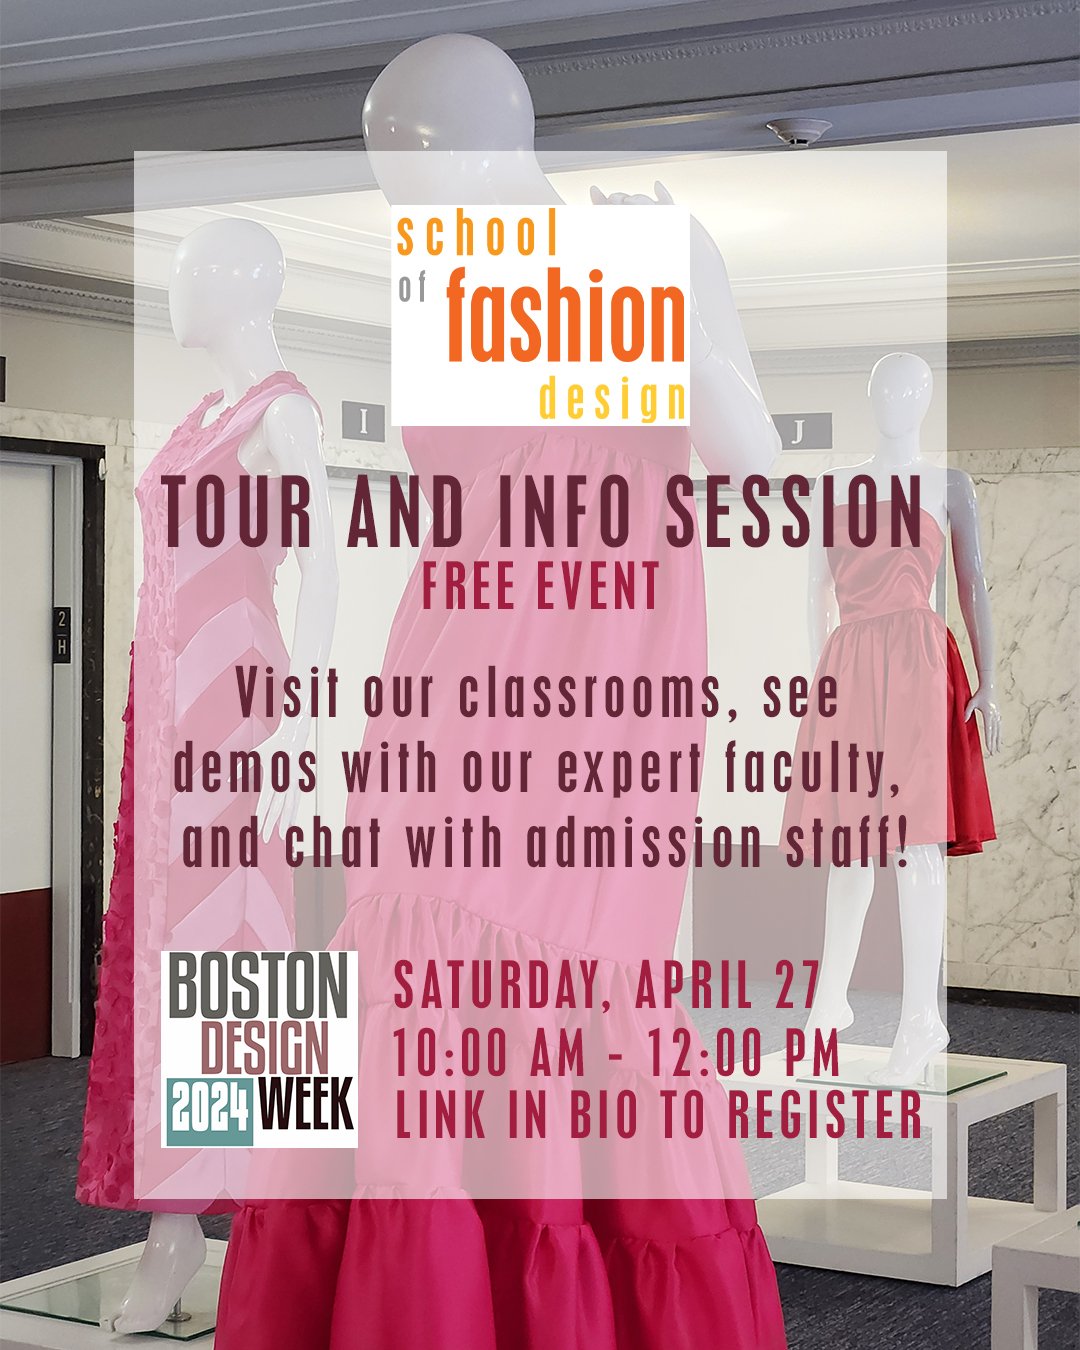 Curious about SFD and what it means to begin your fashion education? This is your chance! We are hosting a tour and info session as part of @bostondesignweek on Saturday, April 27th from 10:00AM to 12:00PM!! We will showcase live demonstrations from 